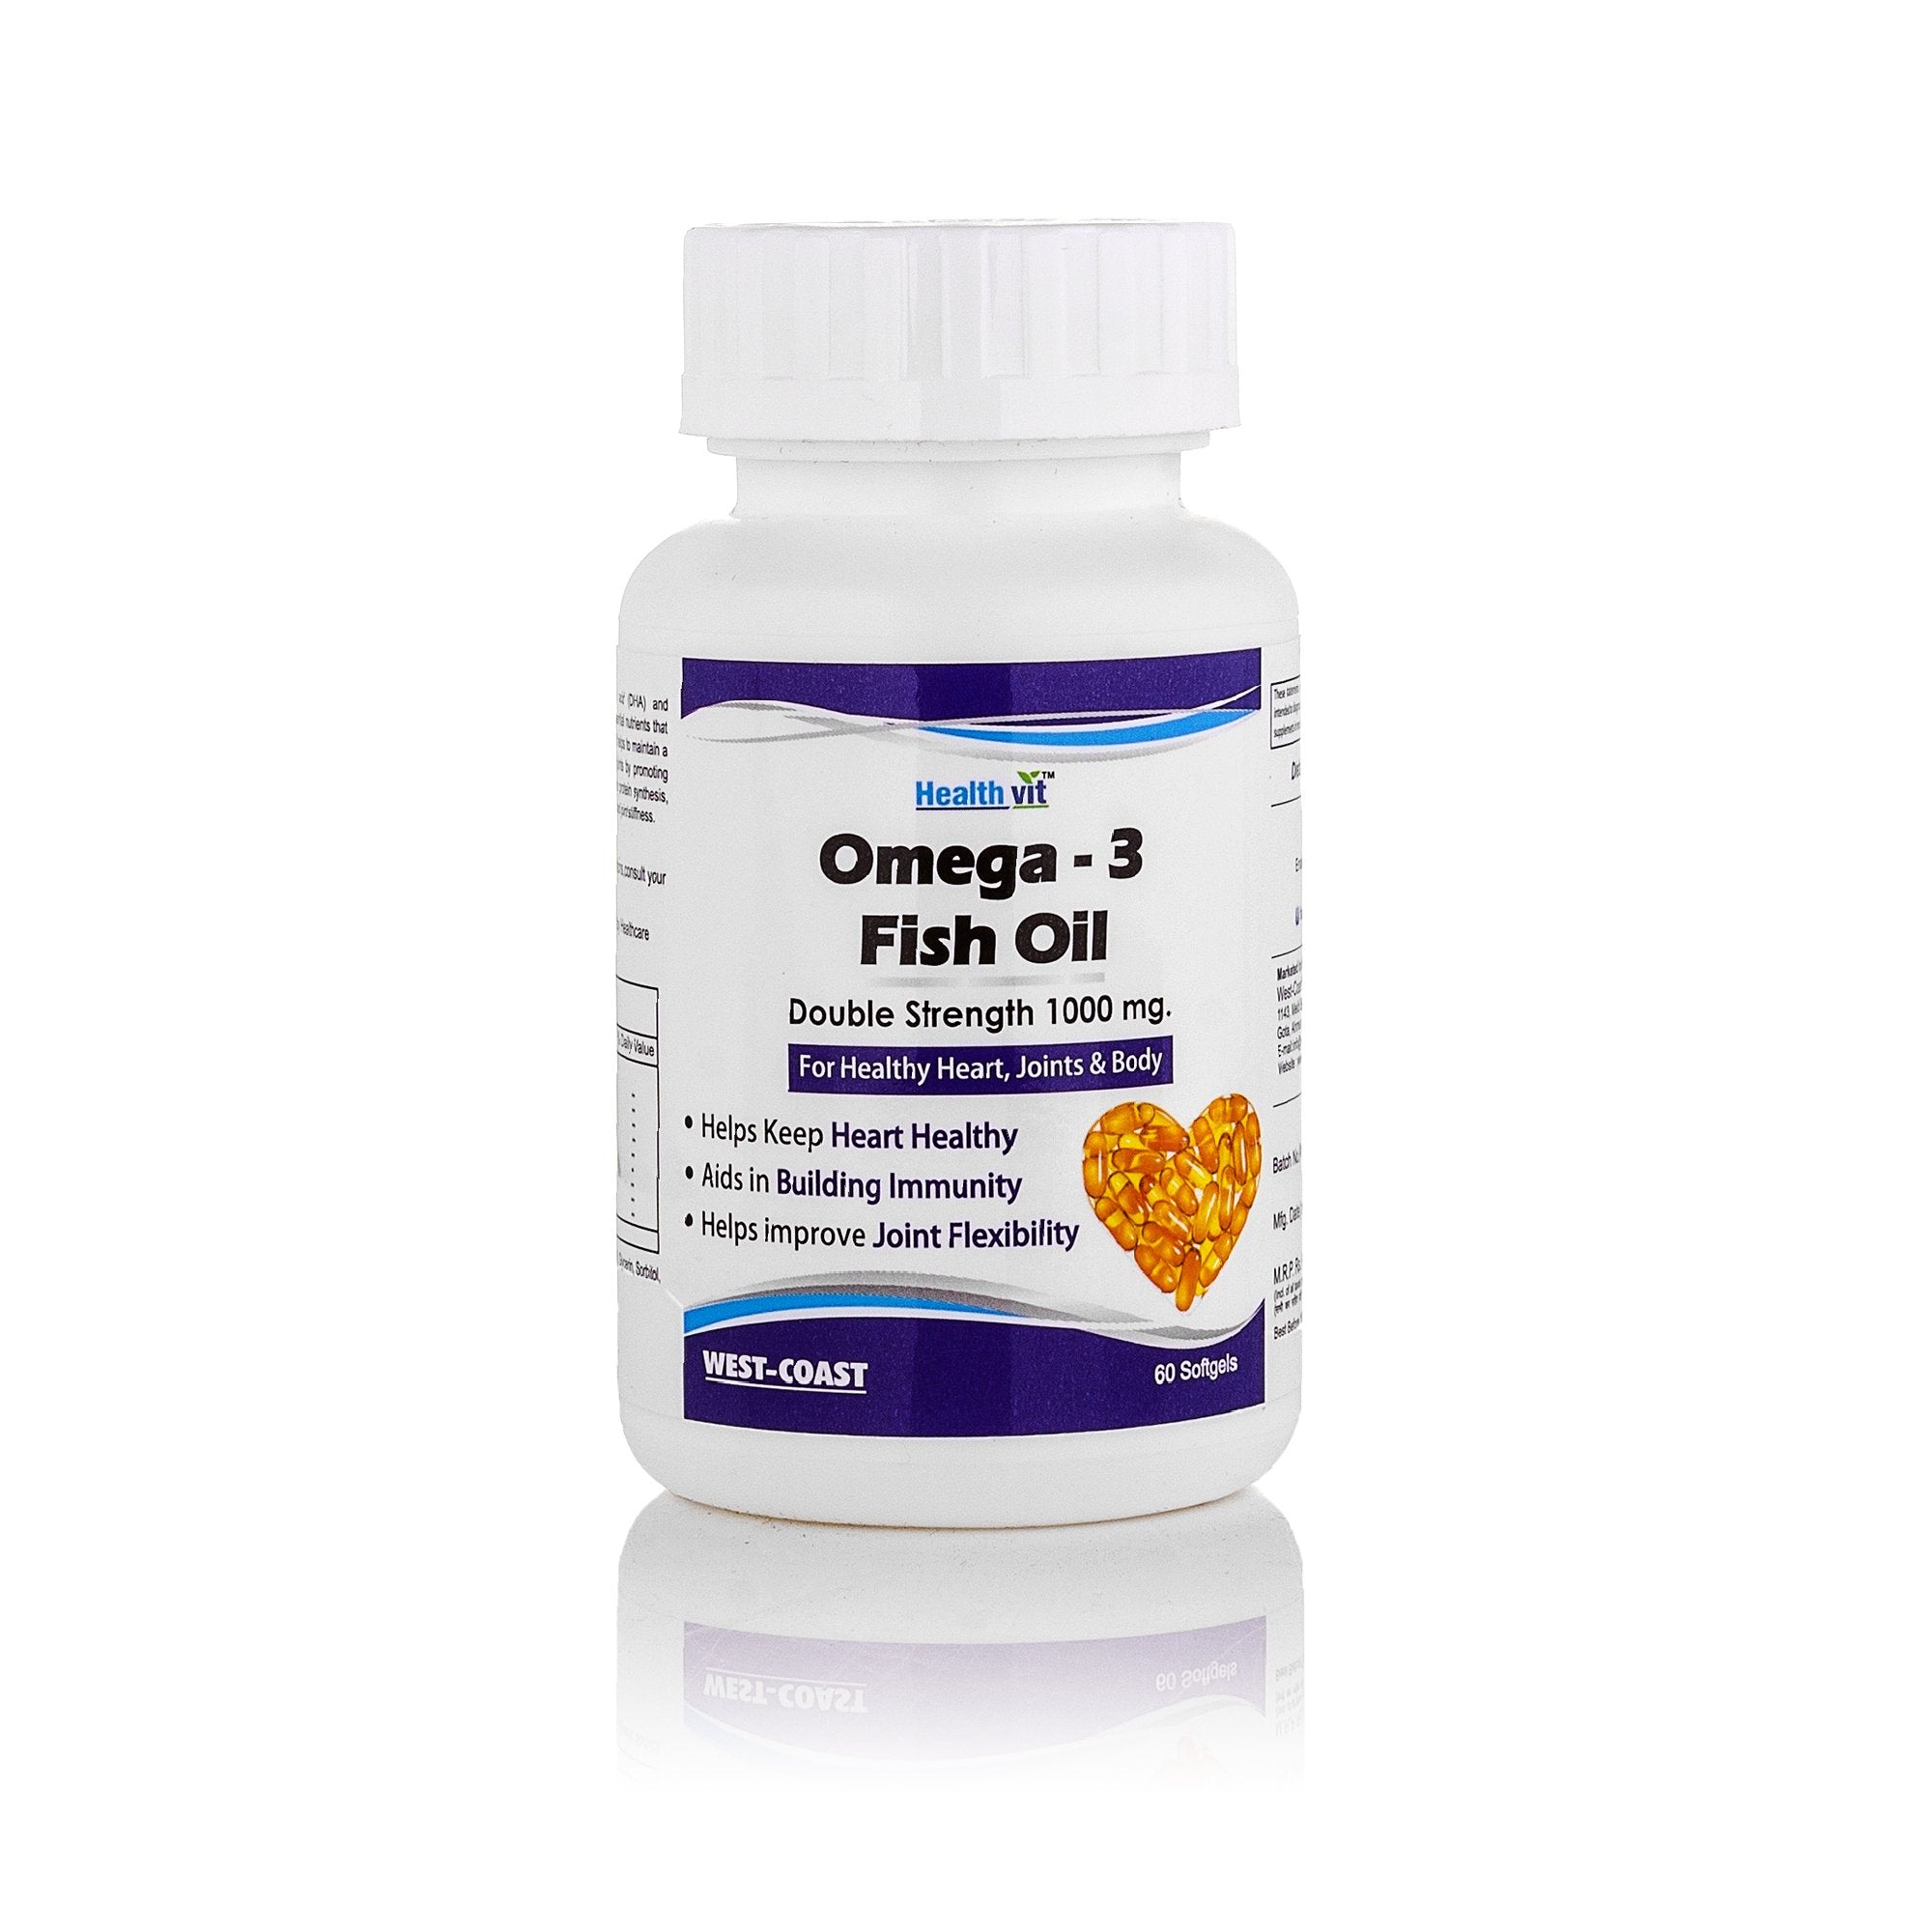 Healthvit Omega 3 Fish Oil Double Strength (EPA & DHA) 1000mg 60 Softgels for Healthy Heart, Joints & Body